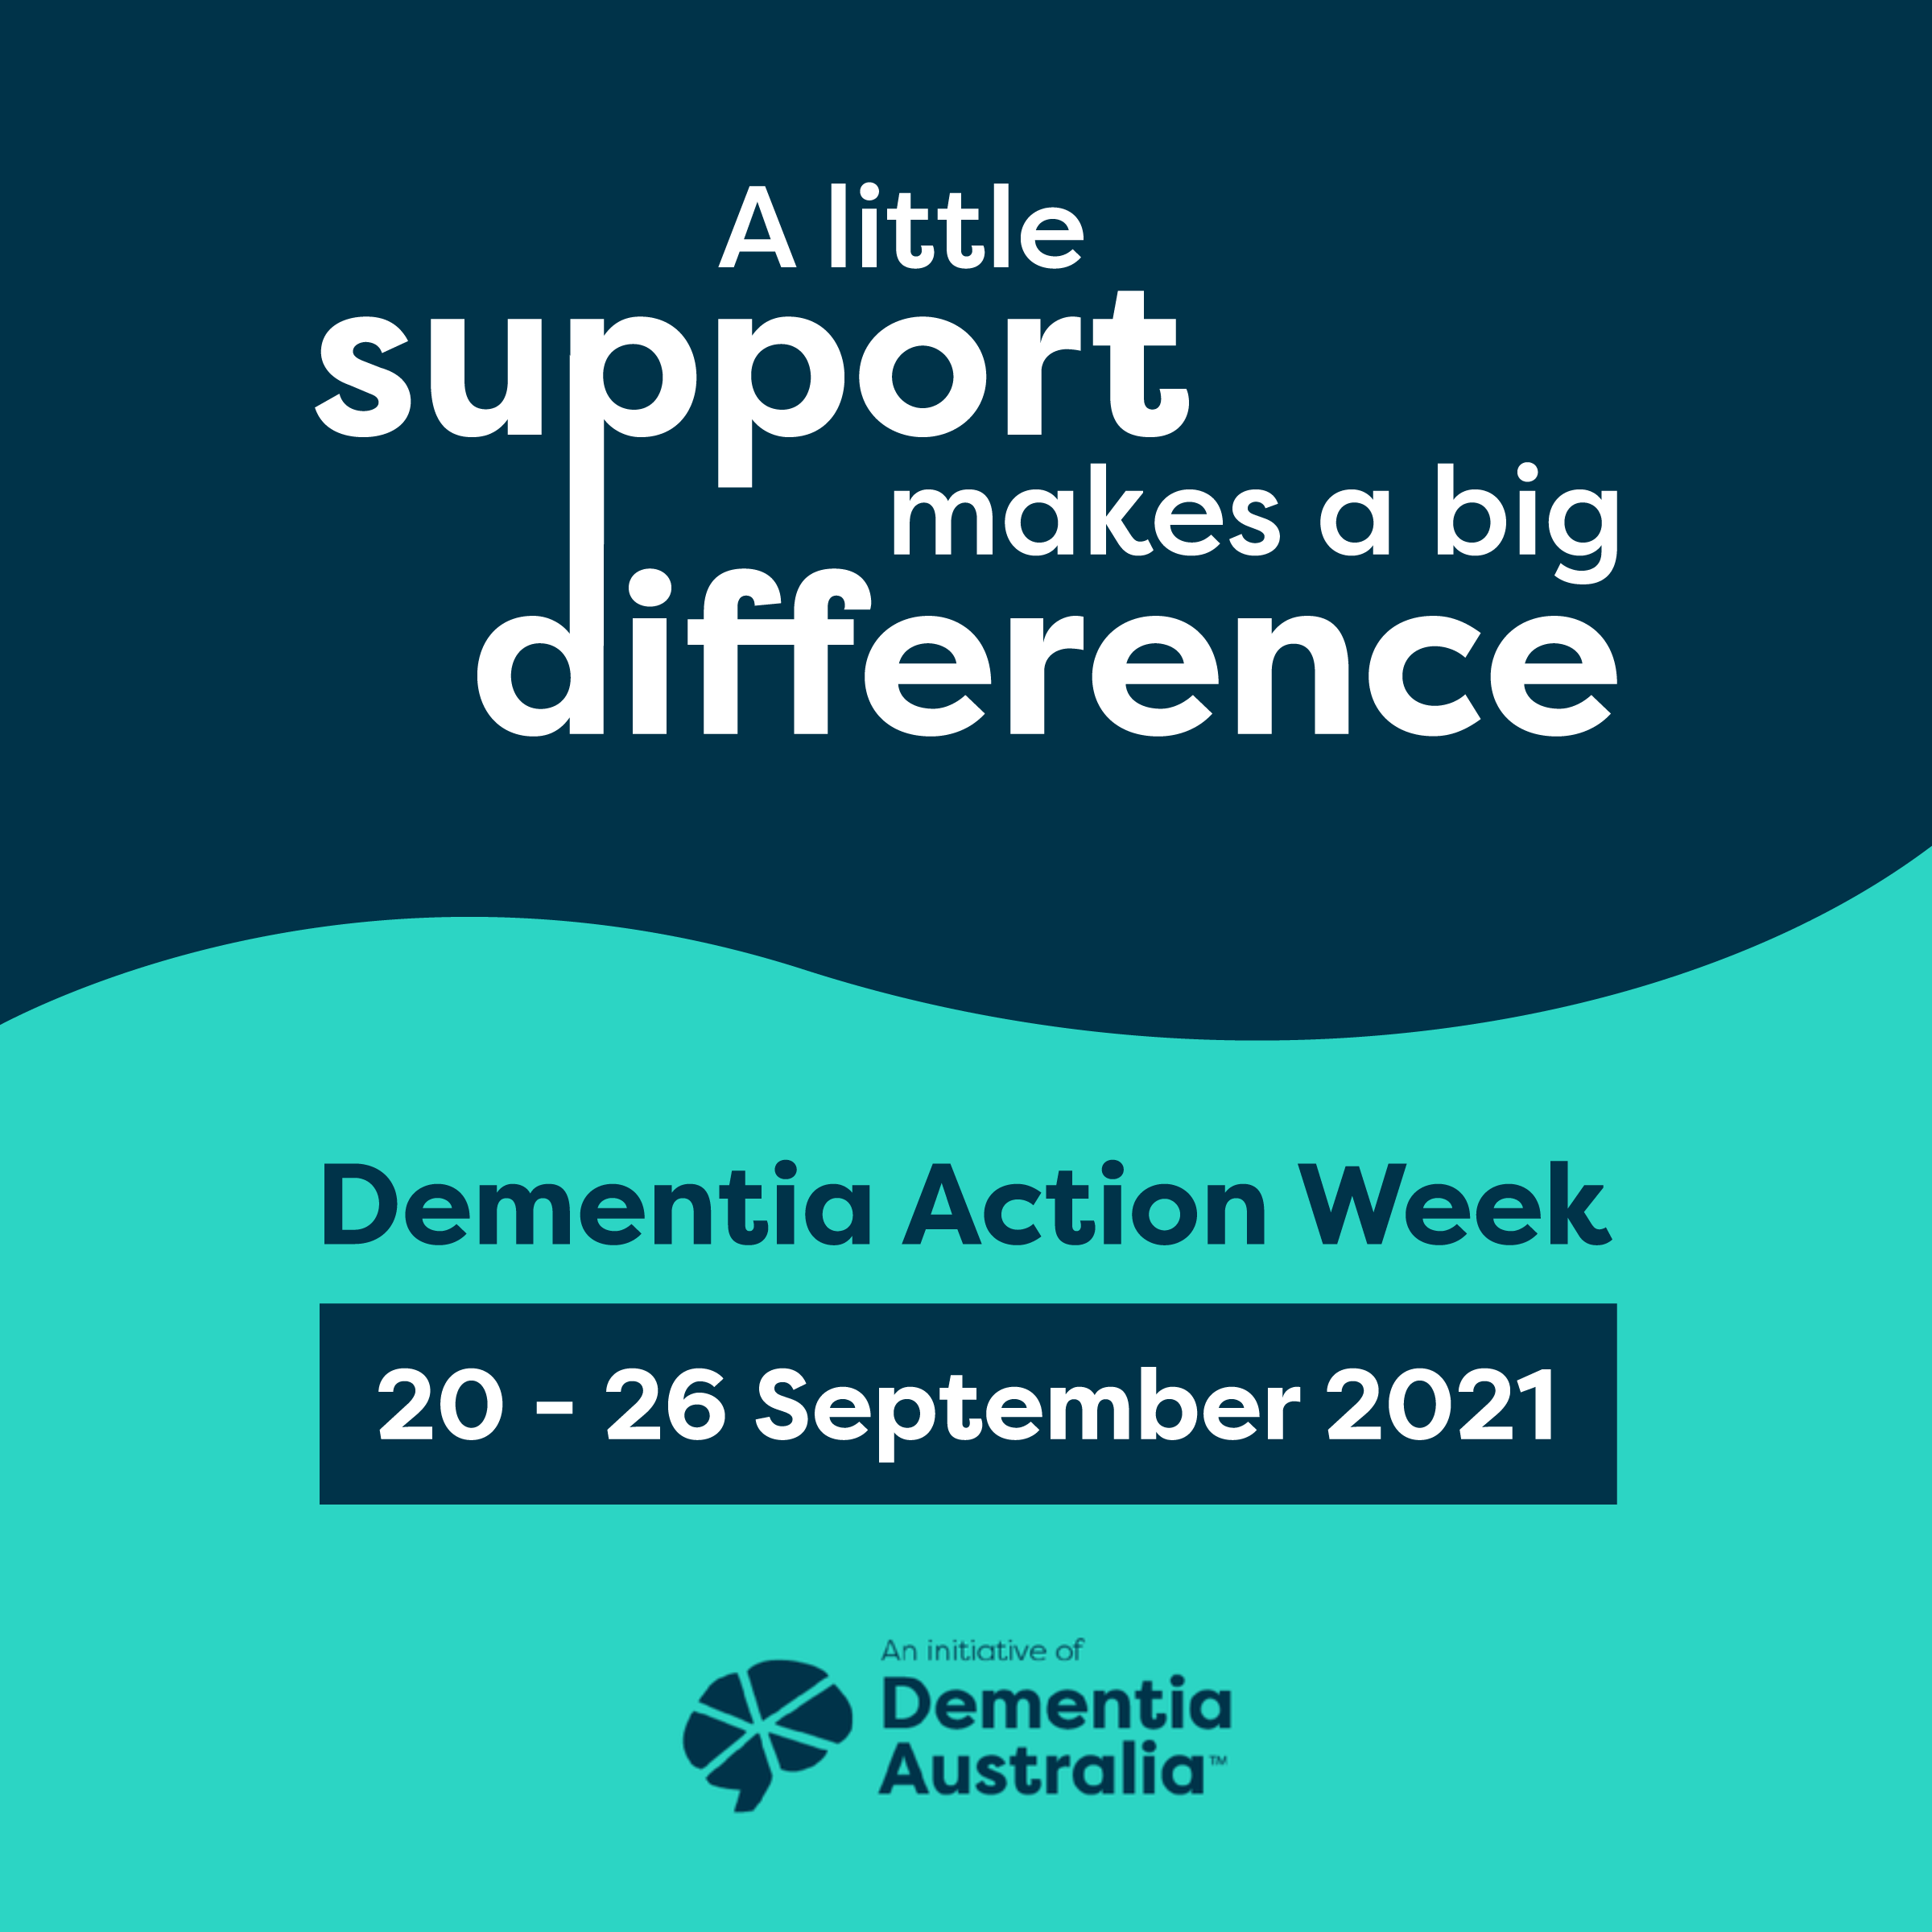 A little support makes a big difference during Dementia Action Week